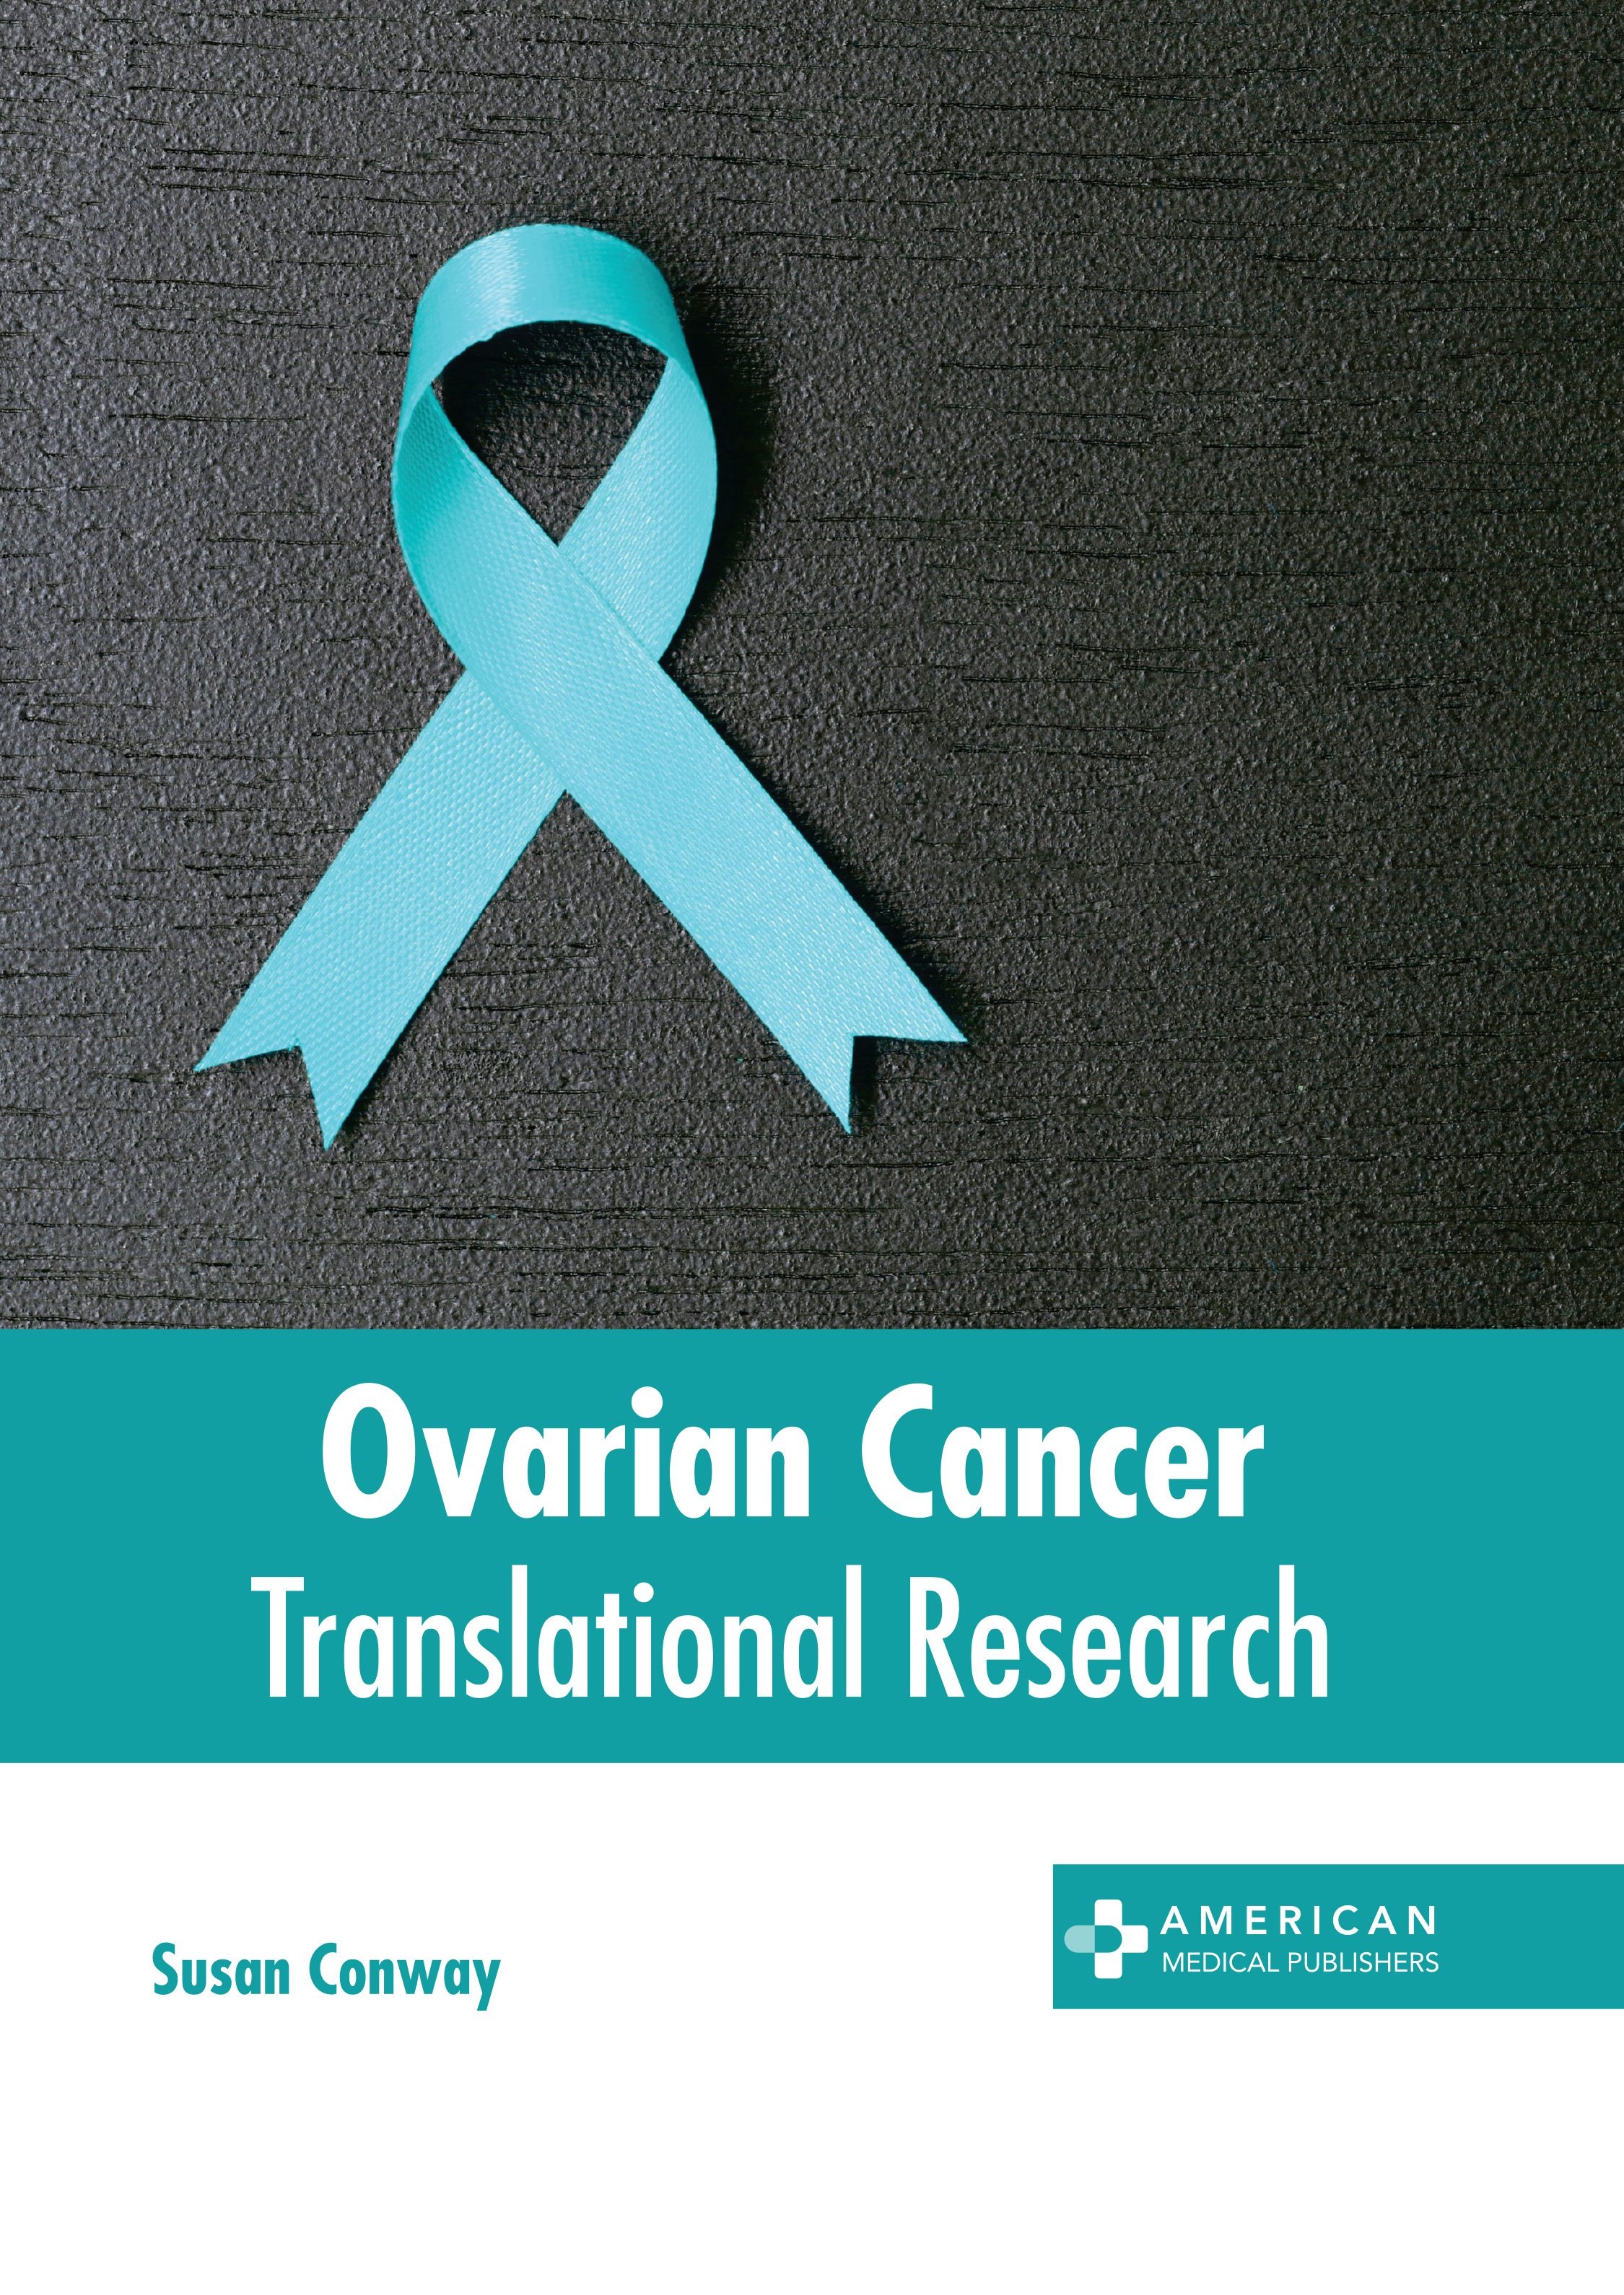 OVARIAN CANCER: TRANSLATIONAL RESEARCH